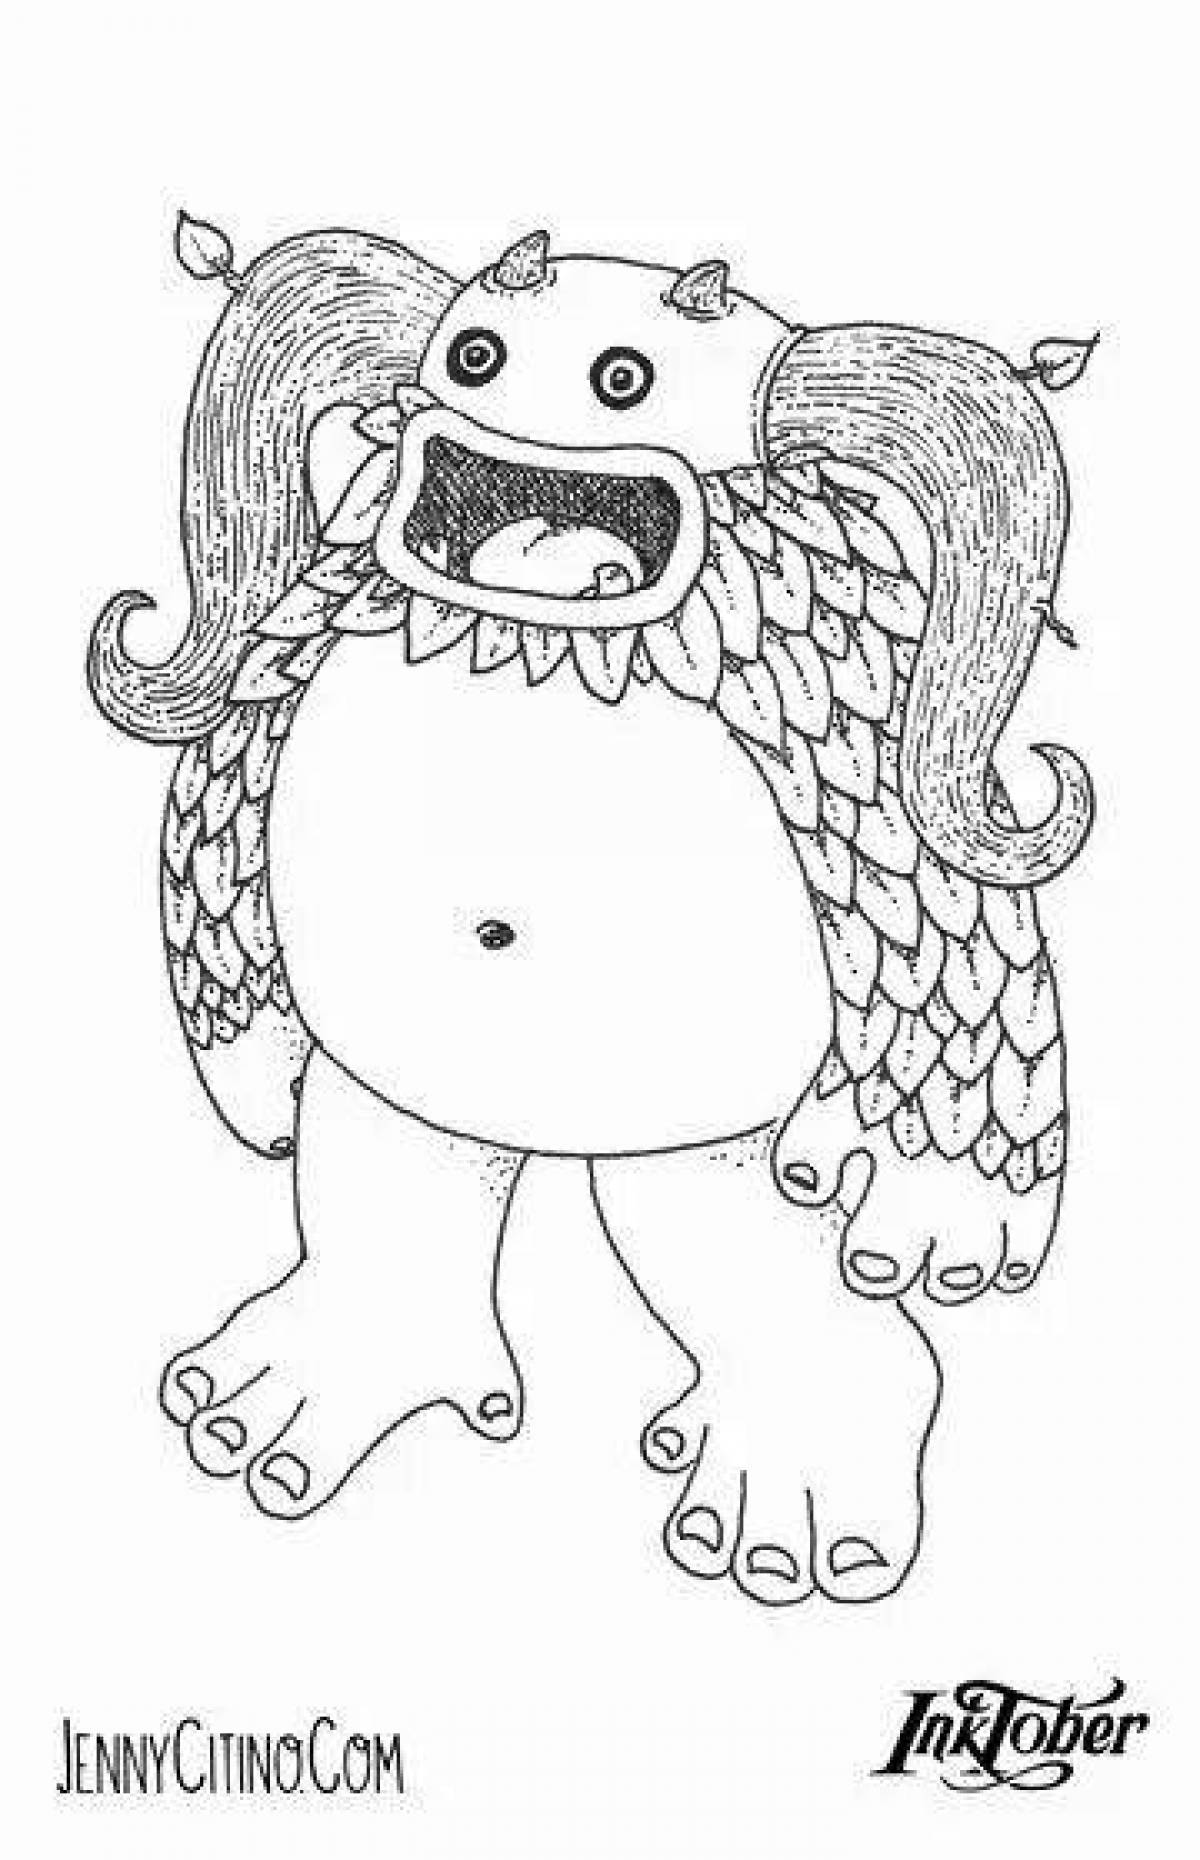 Coloring pages with cute singing monsters for kids